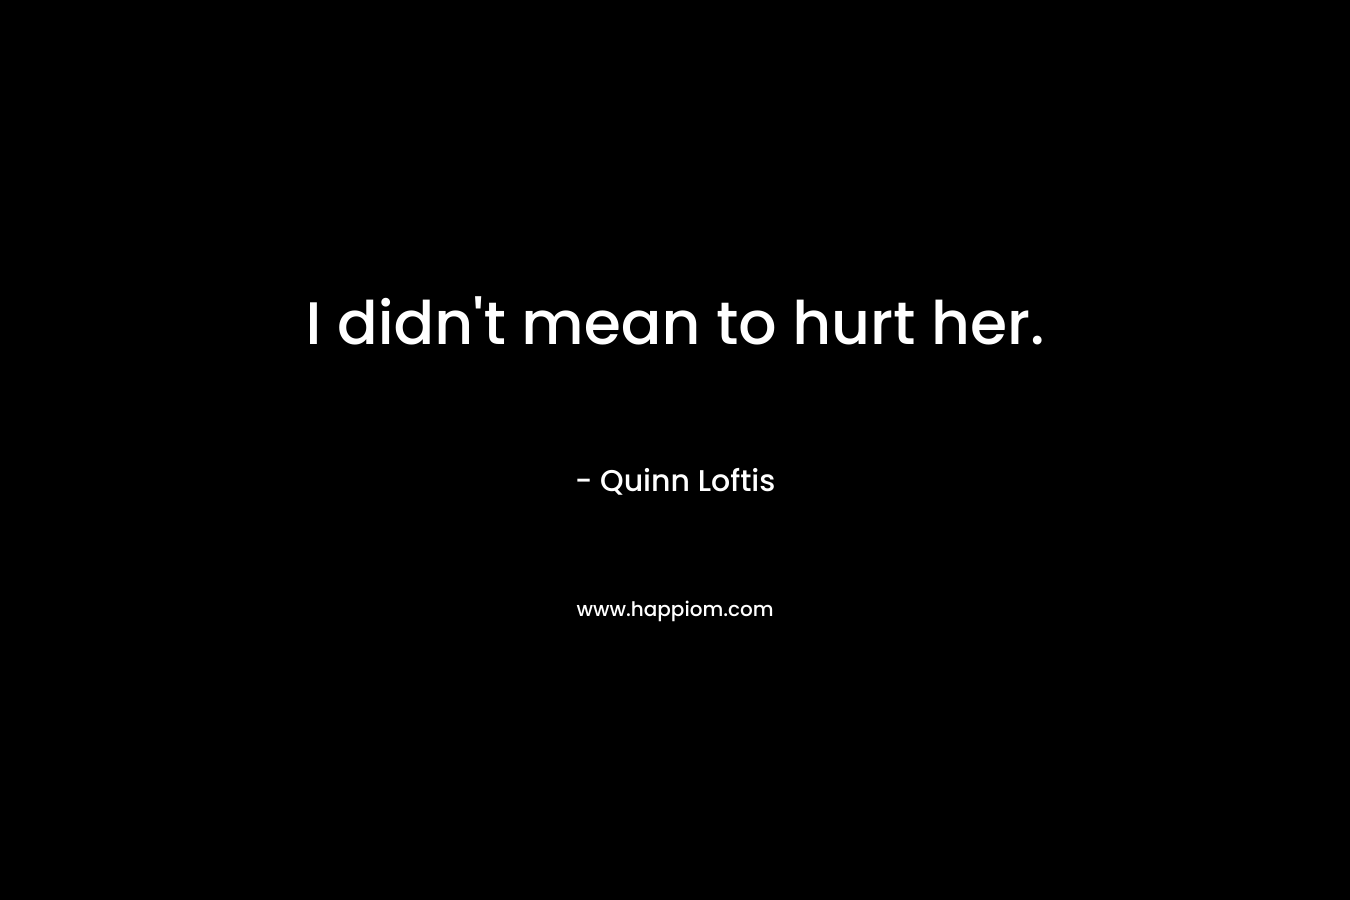 I didn't mean to hurt her.